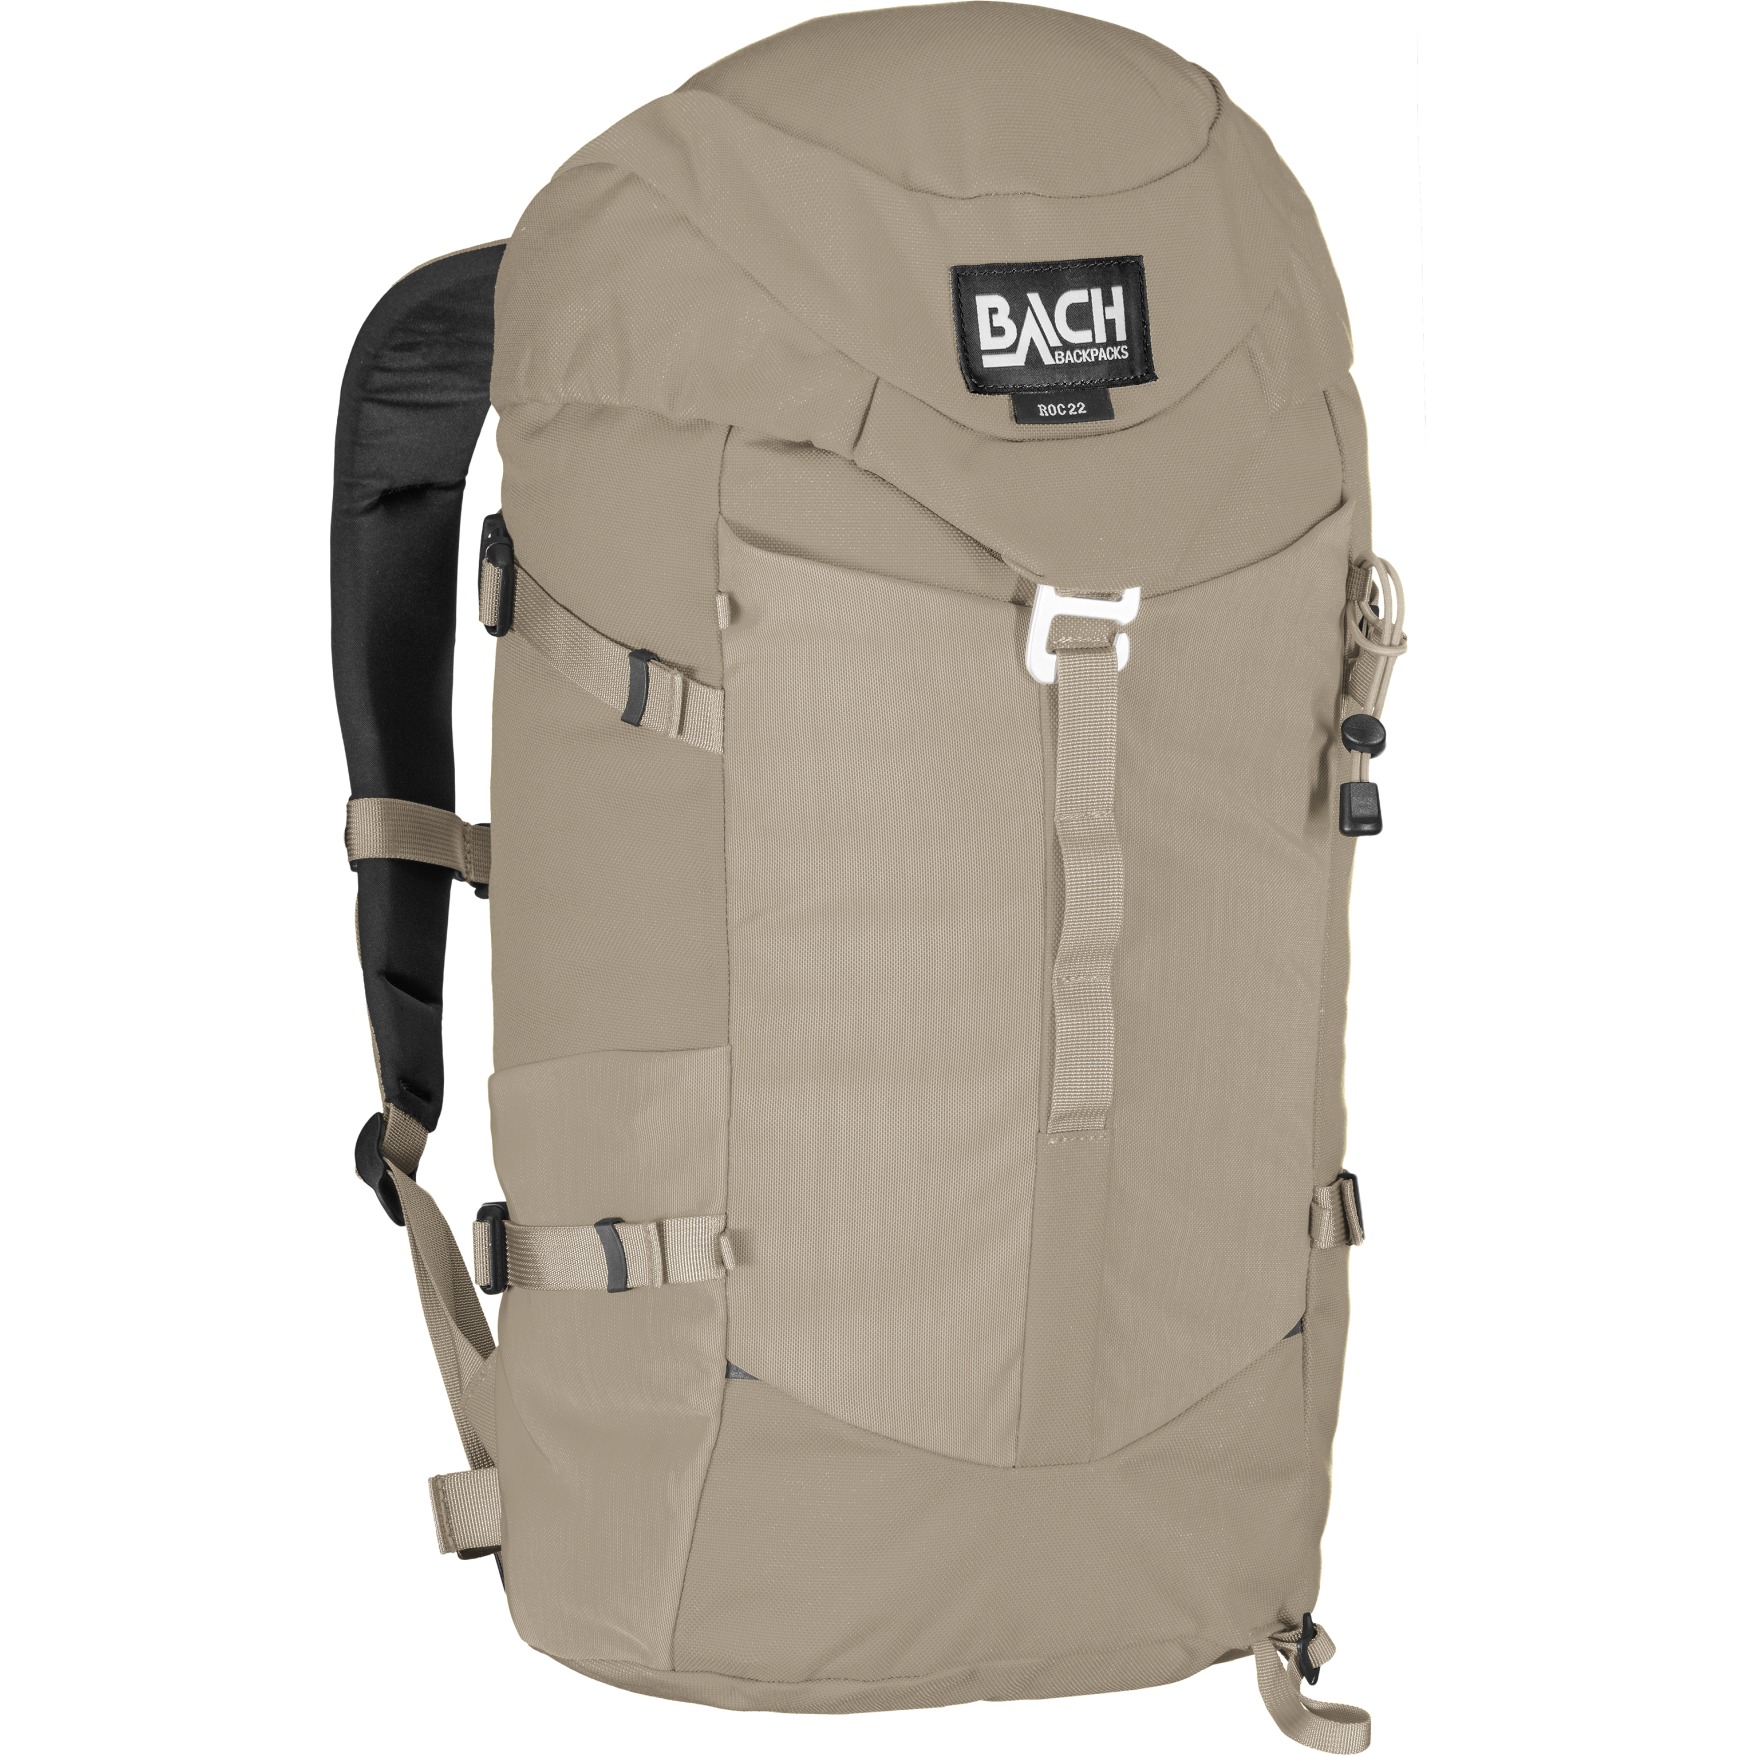 Picture of Bach Roc 22 Backpack - sand beige